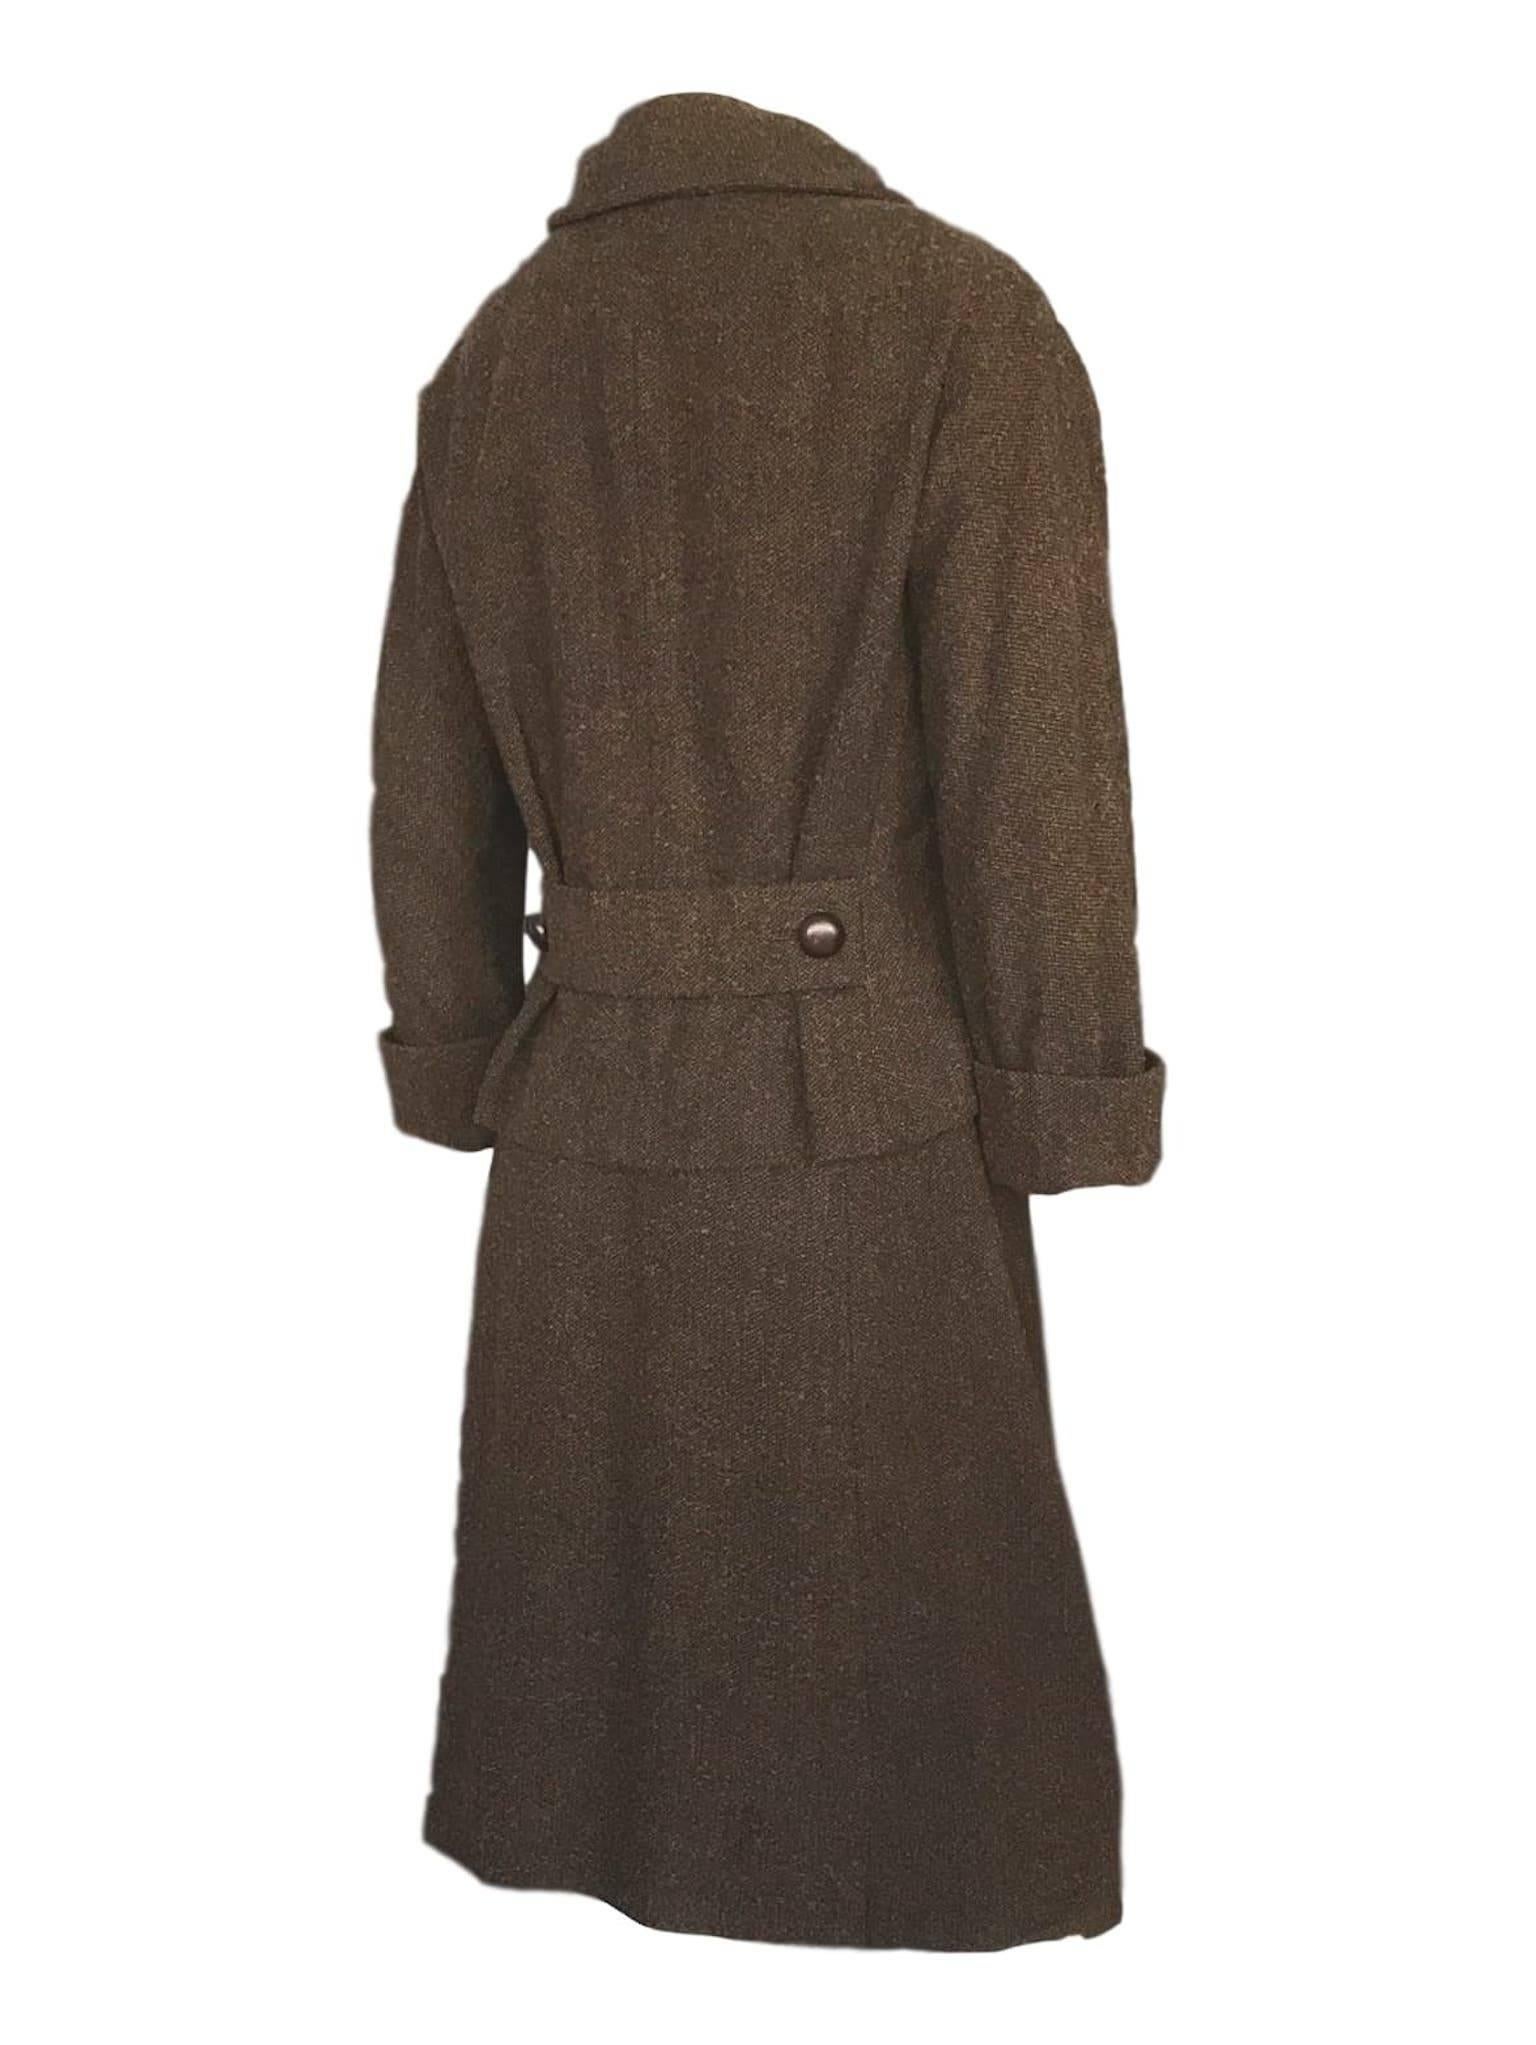 Christian Dior New York early 1950s wool 2 piece. Textured brown boucle wool with fleck, silk damask logo printed lining. 
36 bust and 24 inch jacket length, 25 inch waist, 20 hips, skirt is 25.6 length with 5 inch selvedge 
Excellent condition